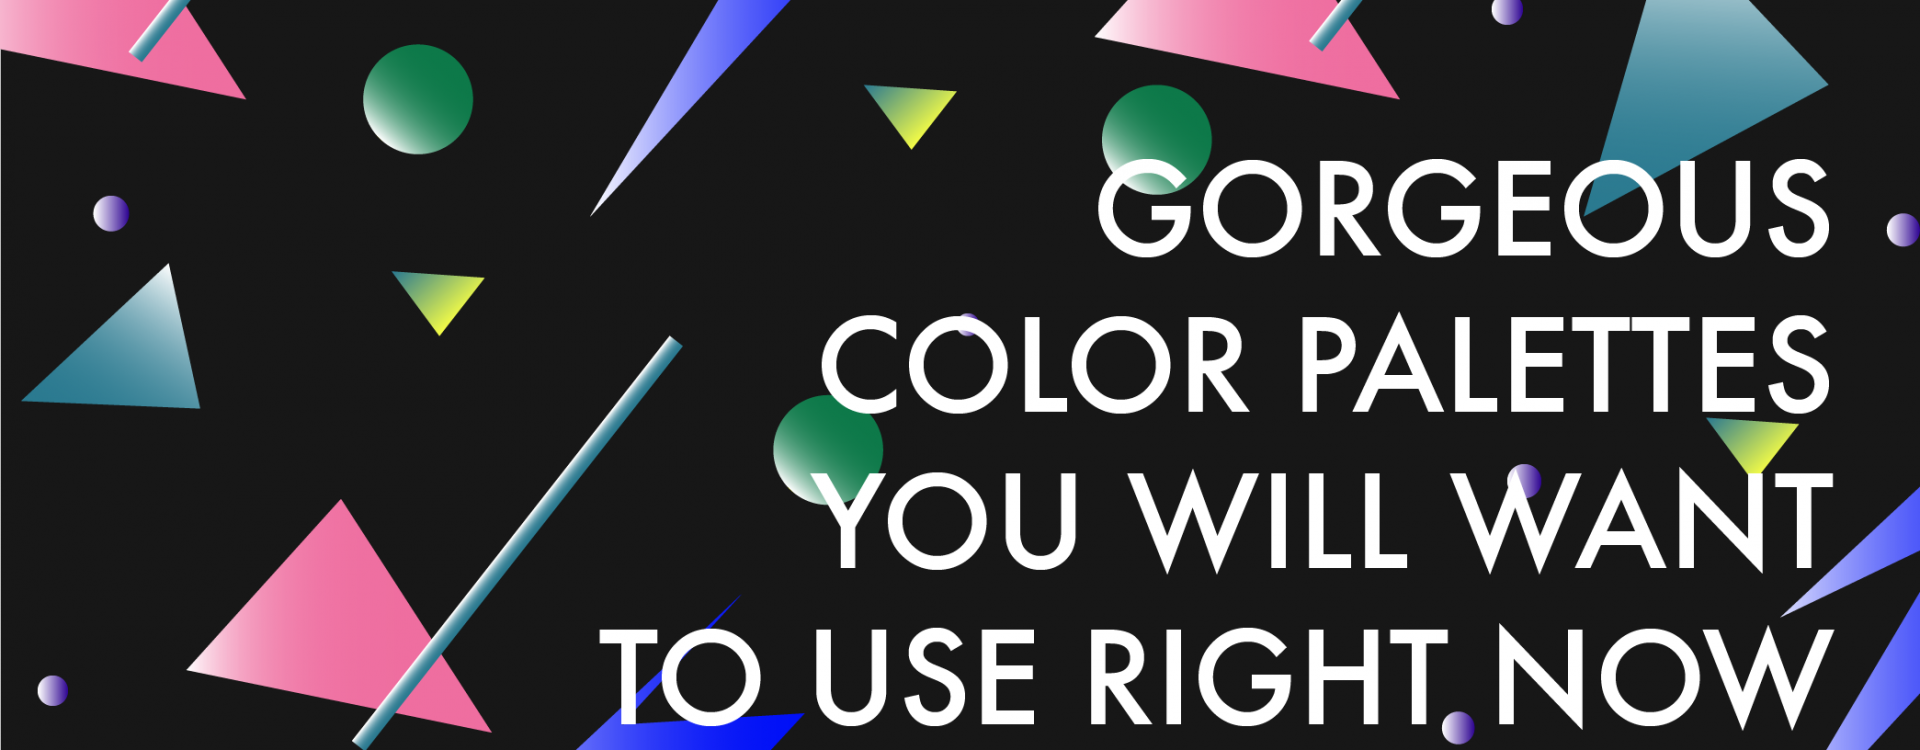 Blog Header Image "Gorgeous Color Palettes You’ll Want to Use Right Now"